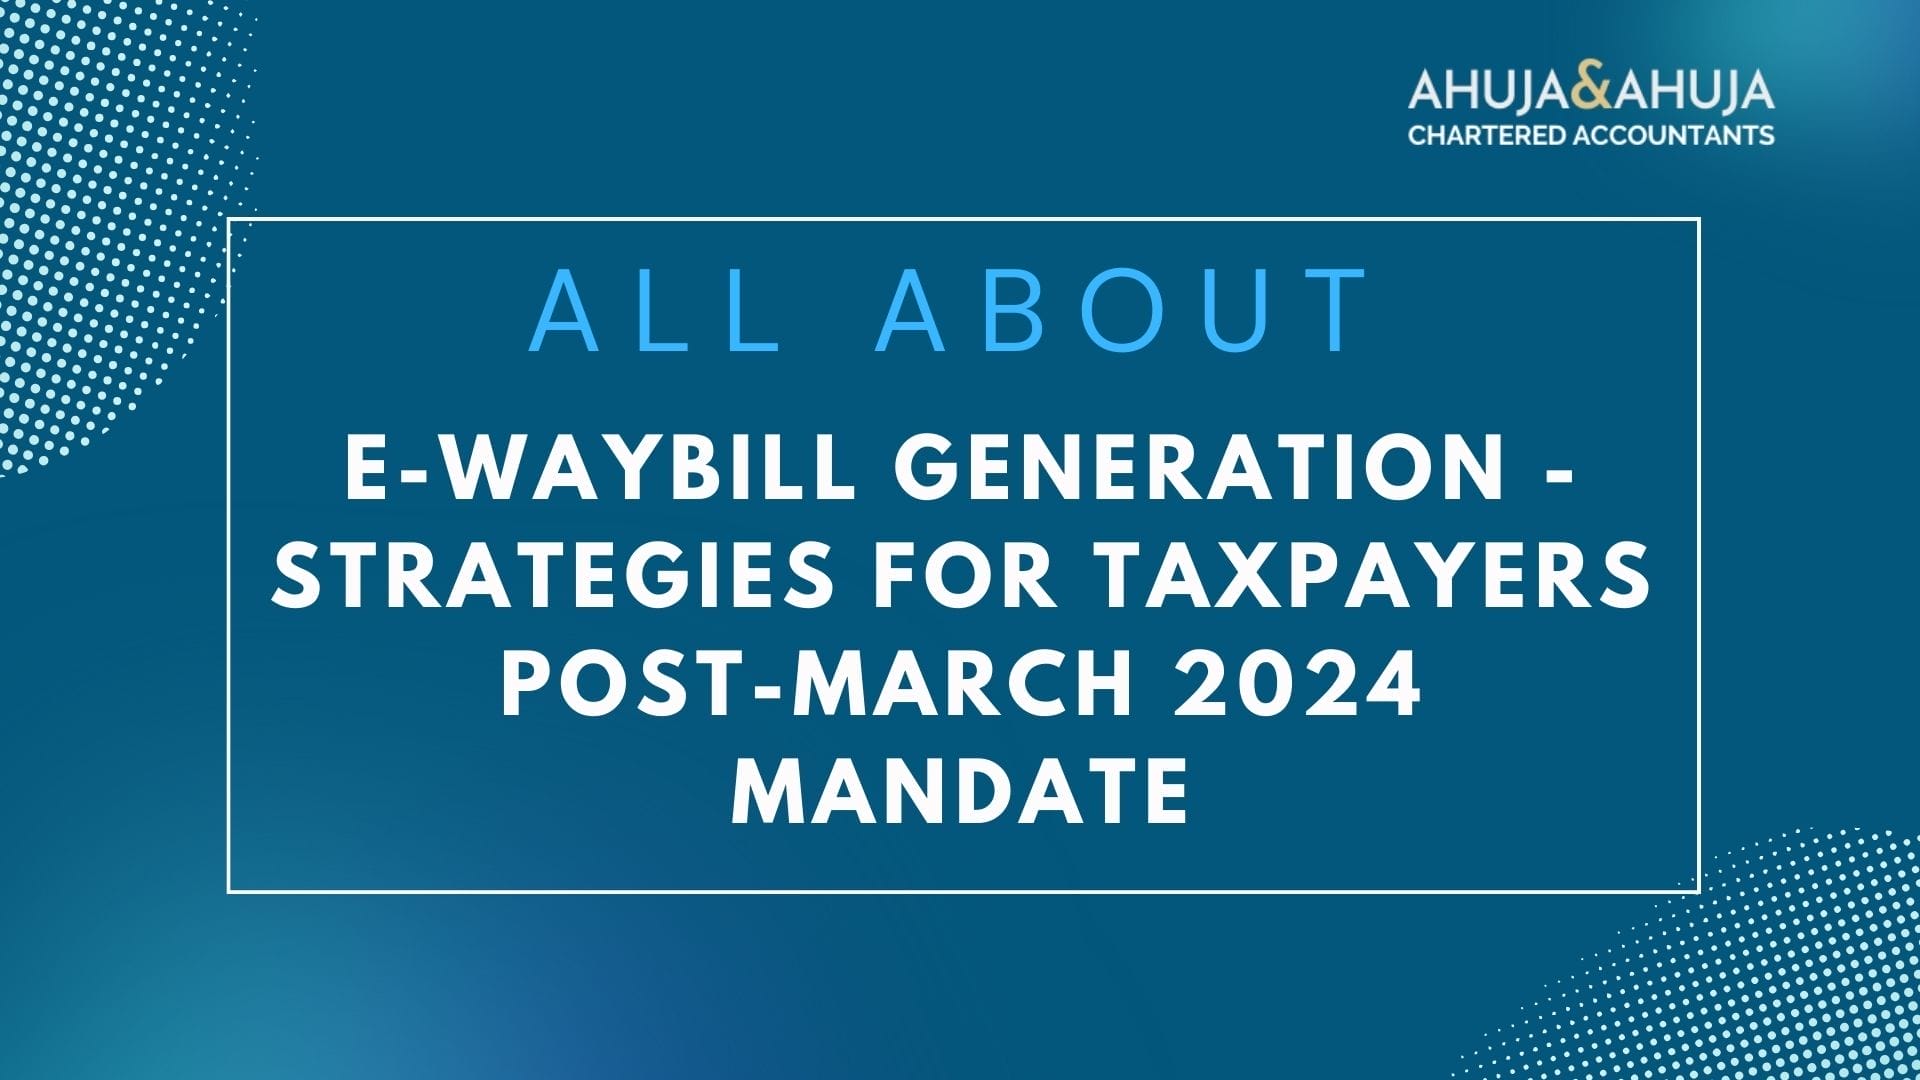 E-Waybill Generation - Strategies for Taxpayers Post-March 2024 Mandate